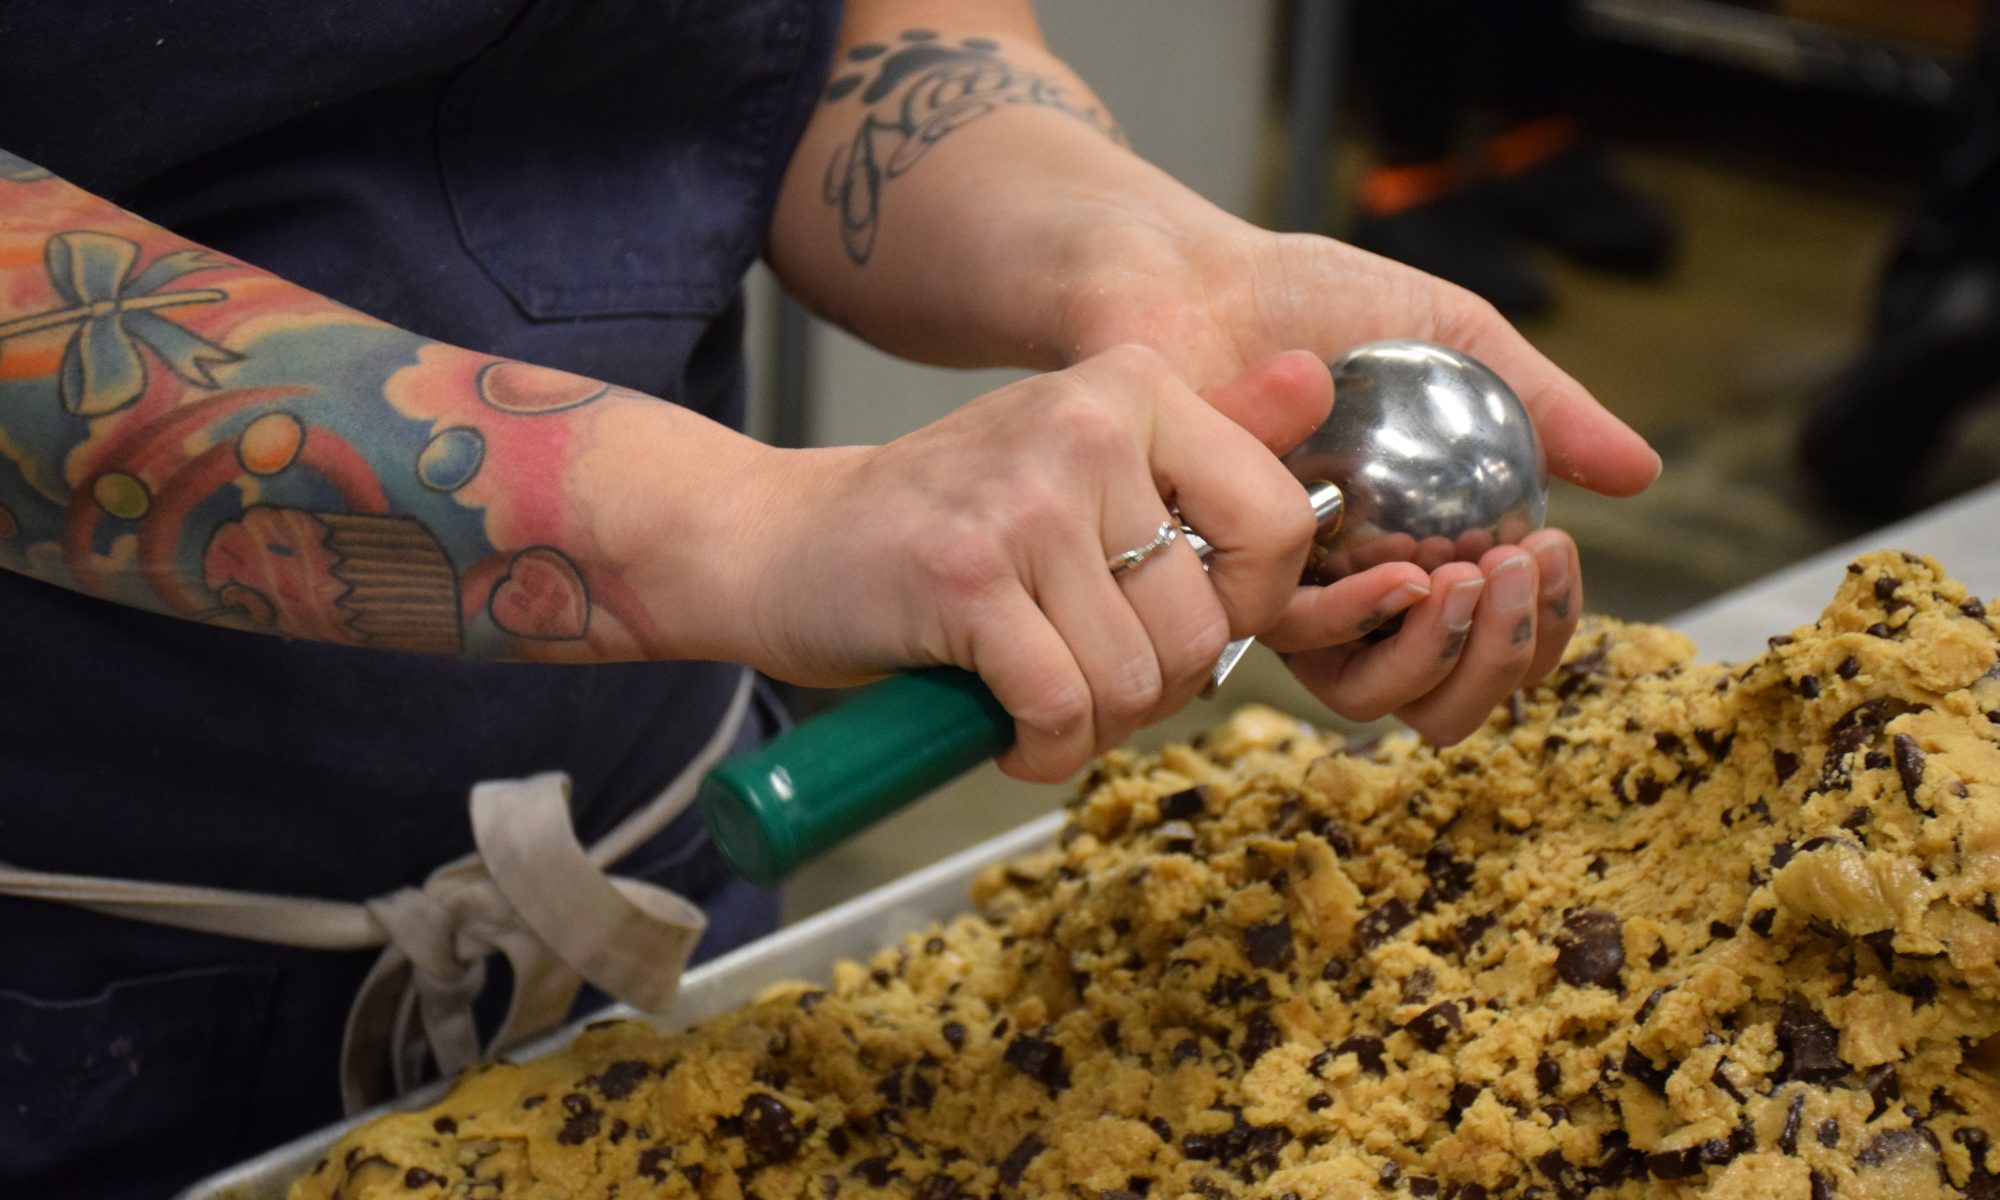 Executive Pastry Chef Lori Sauer scoops cookie dough at Crafted Baked Goods in Liberty Station.